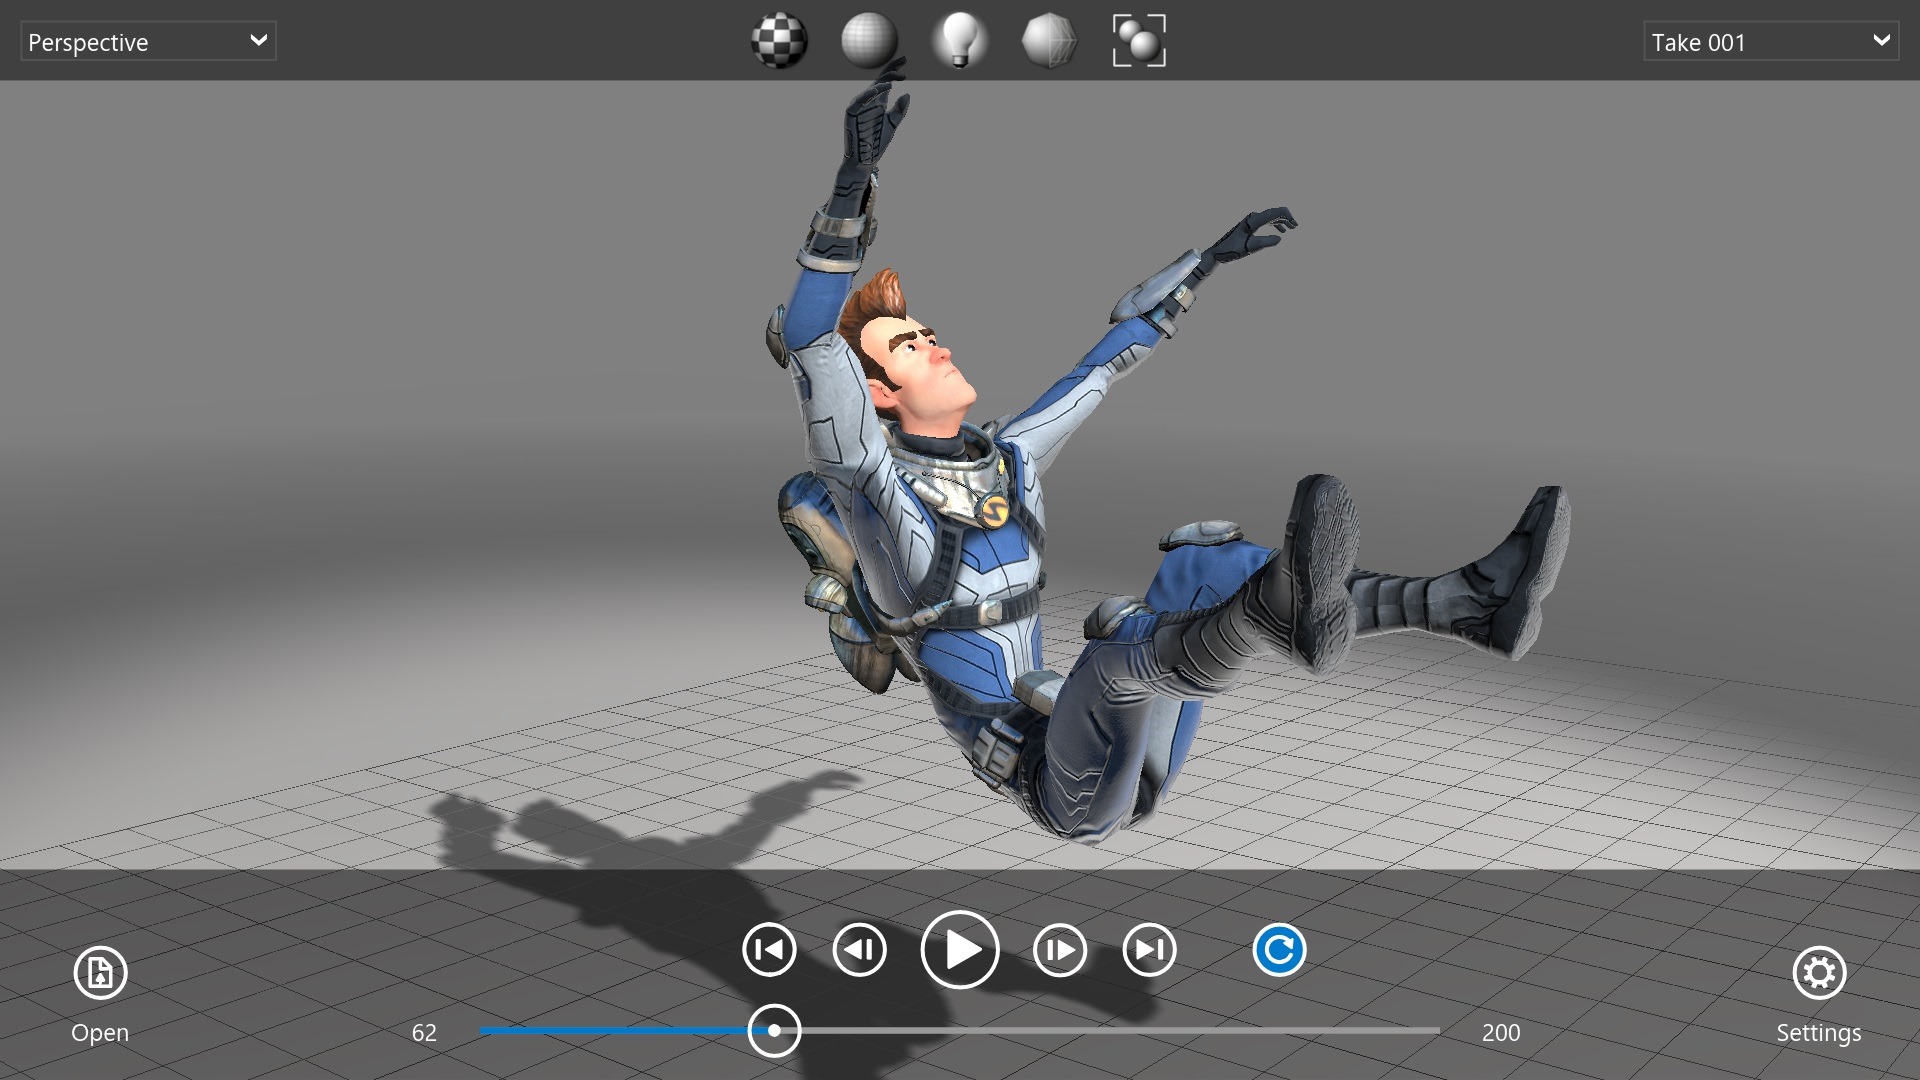 Review 3D Models on your Windows 8 PC with the Autodesk FBX Review App |  Windows Experience Blog